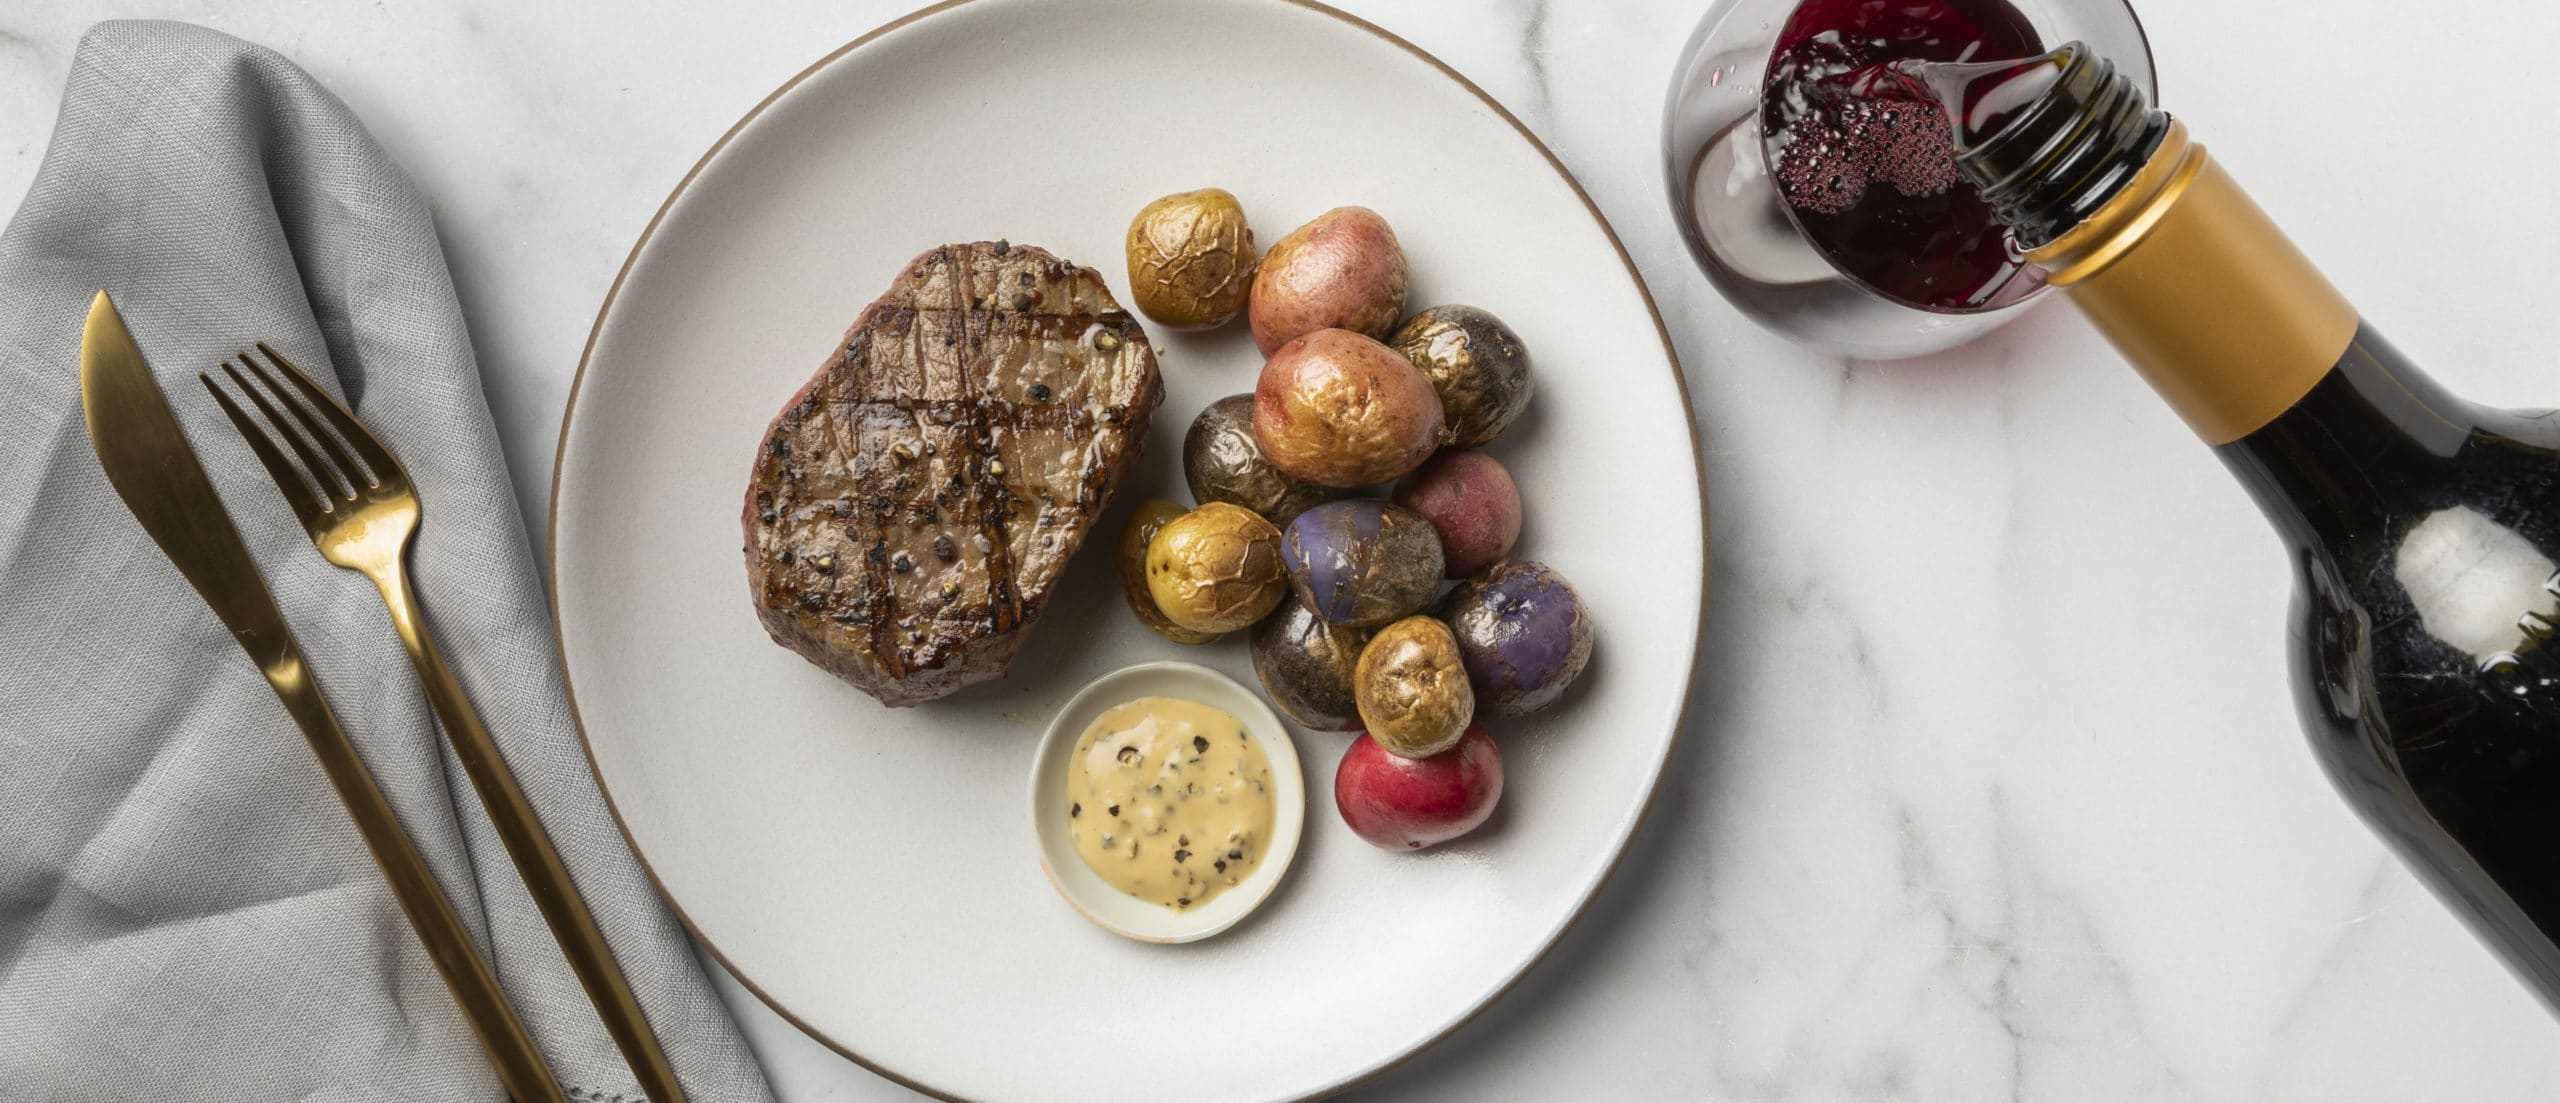 Mini roasted potatoes and steak on a plate with a glass of red wine